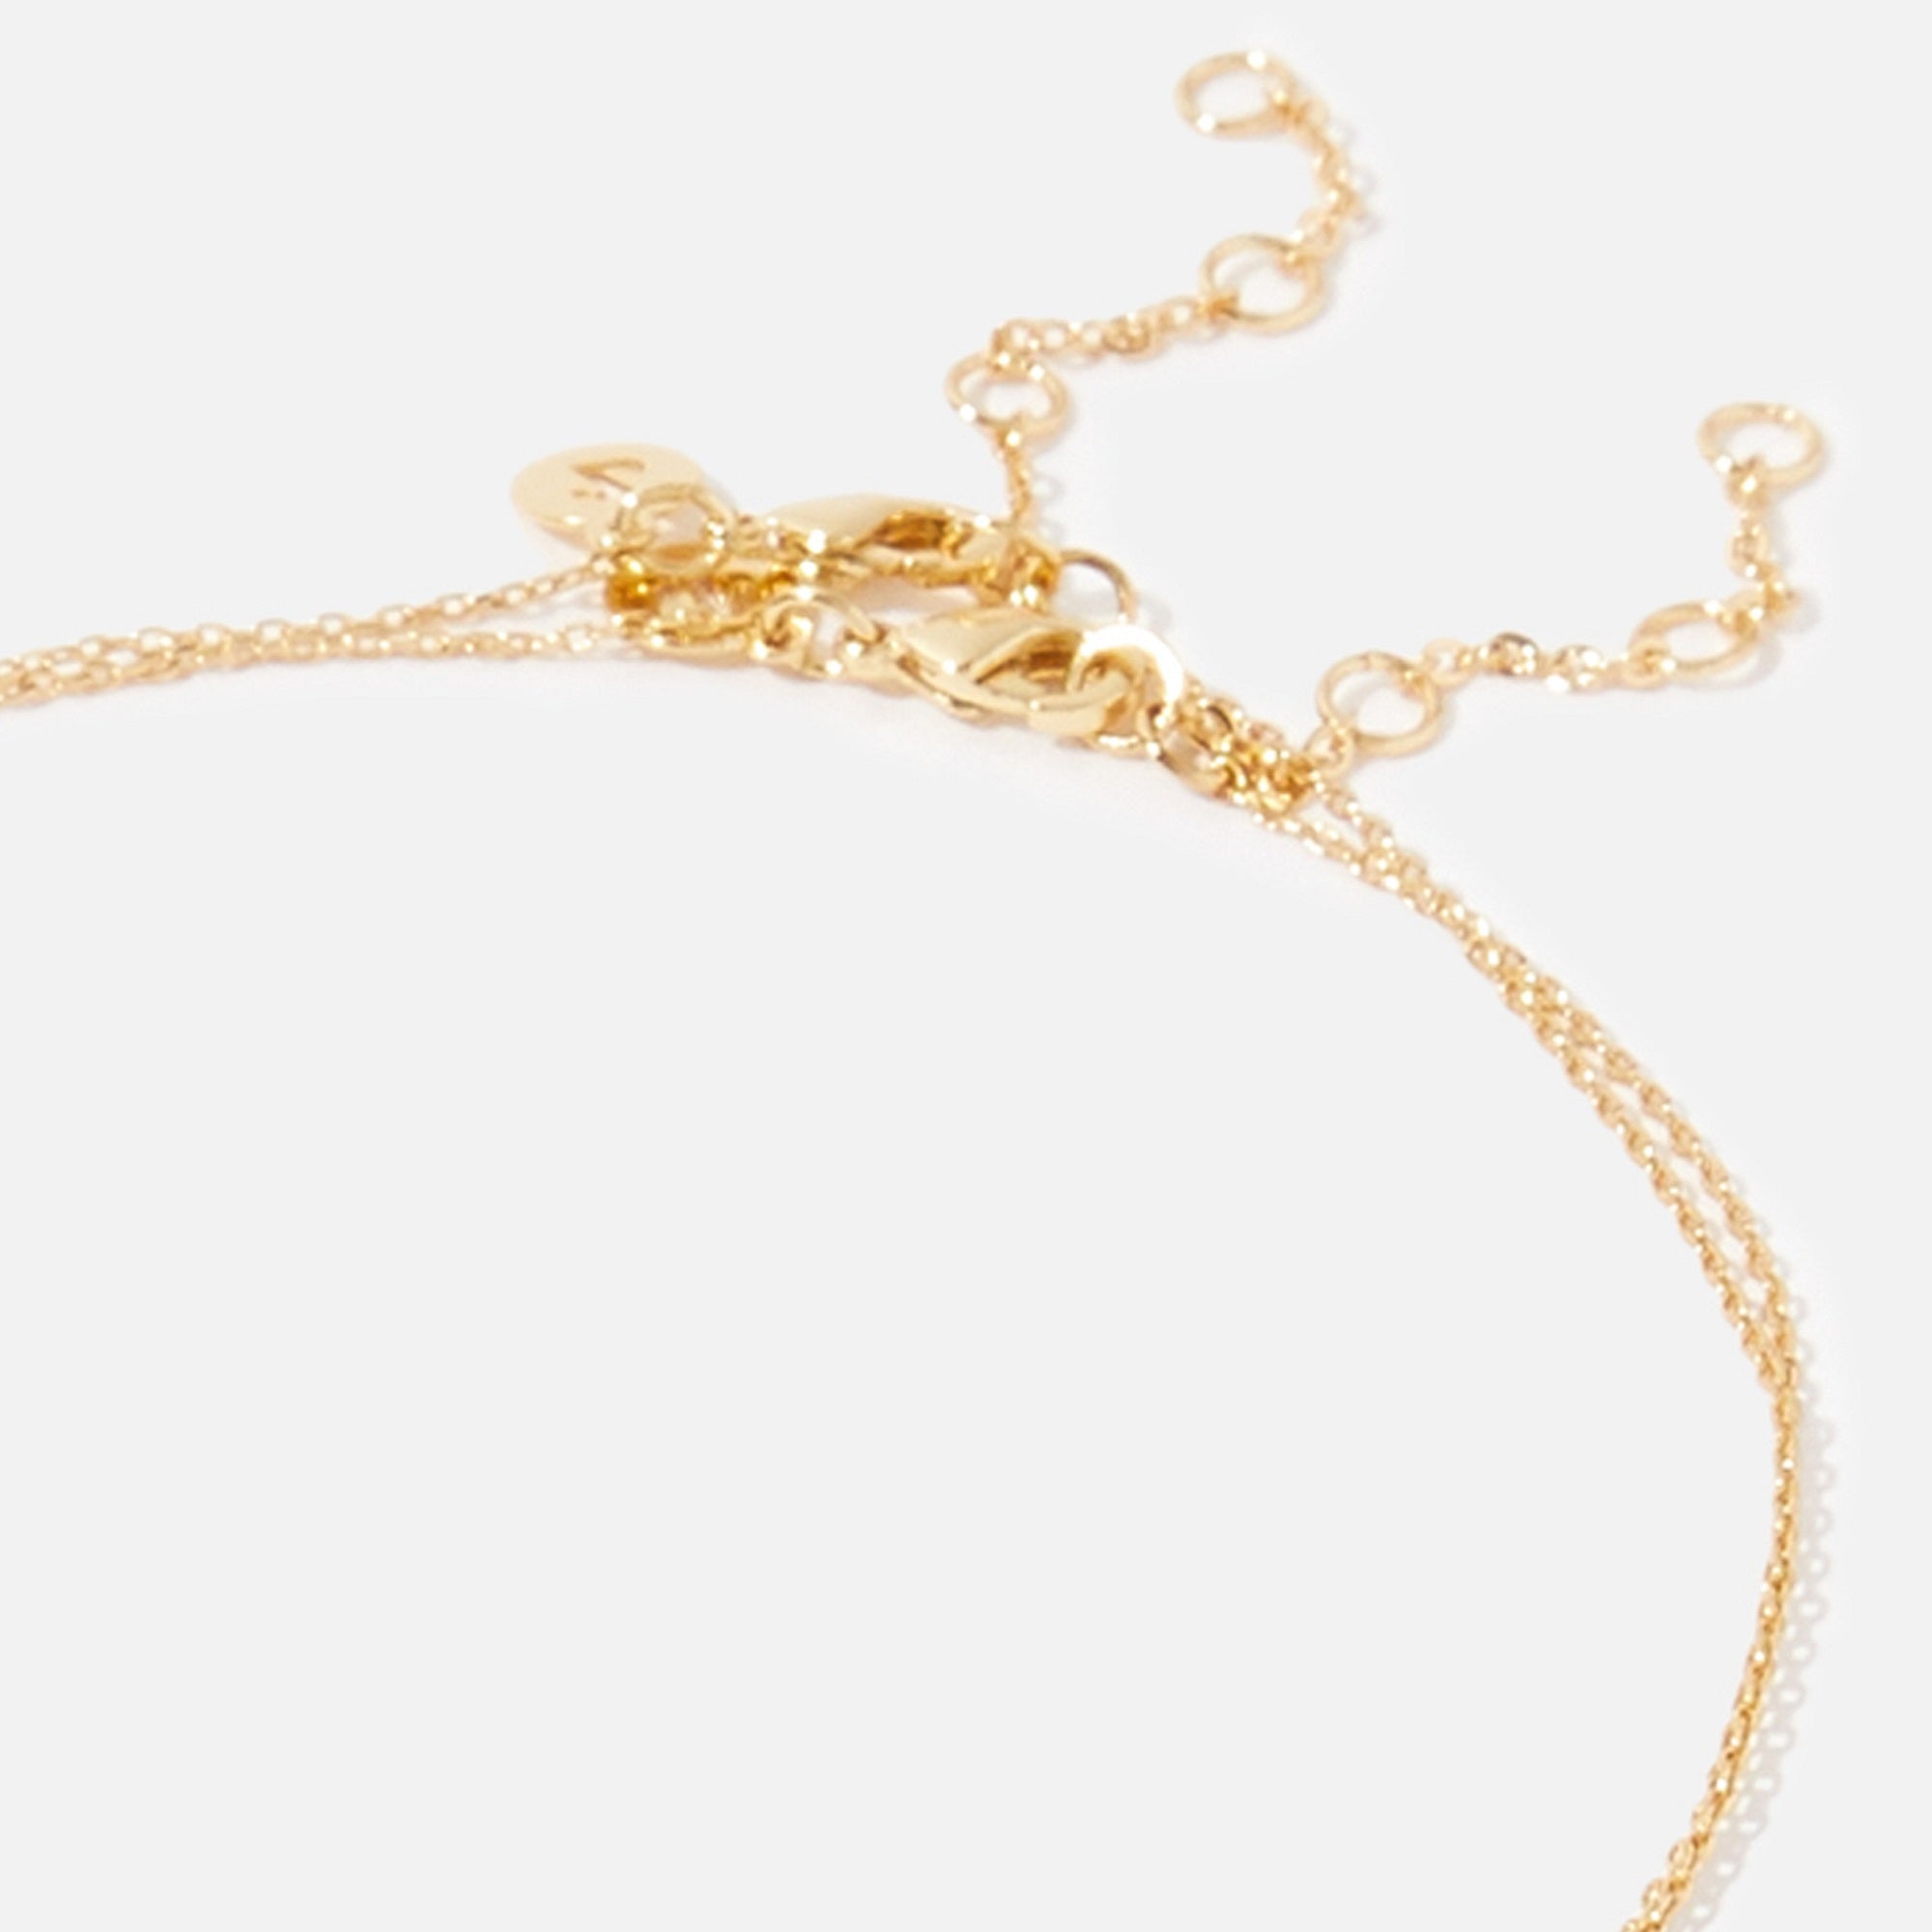 Real Gold Plated Layered Good Fortune Pendant Ncklace For Women By Accessorize London